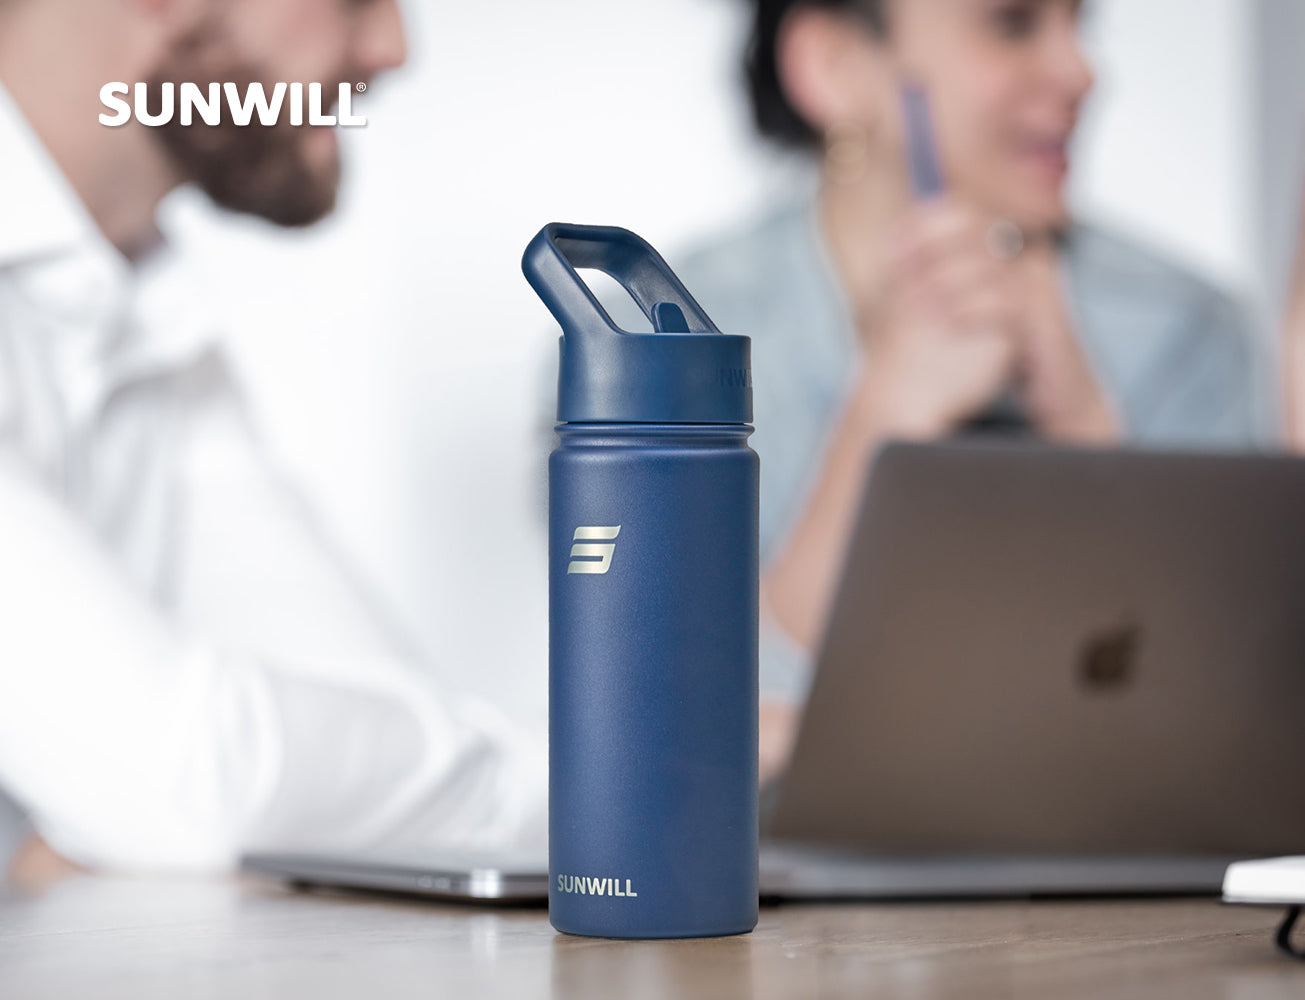 18oz Insulated Water Bottle with Straw - Powder Coated Navy Blue